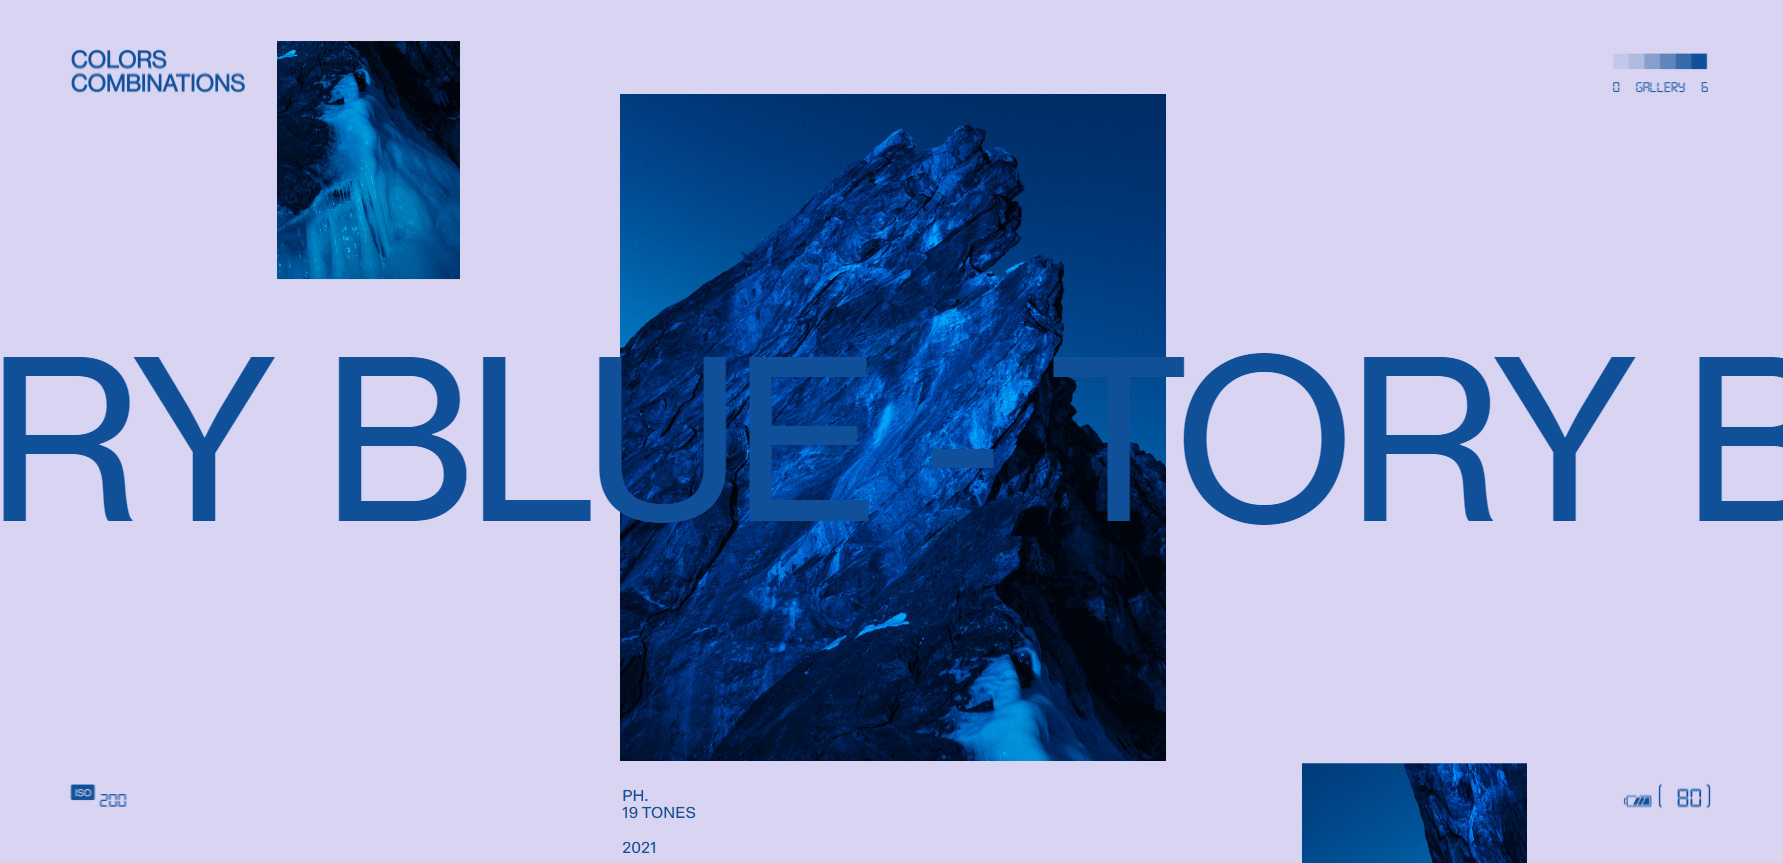 Colors combinations - Website of the Day